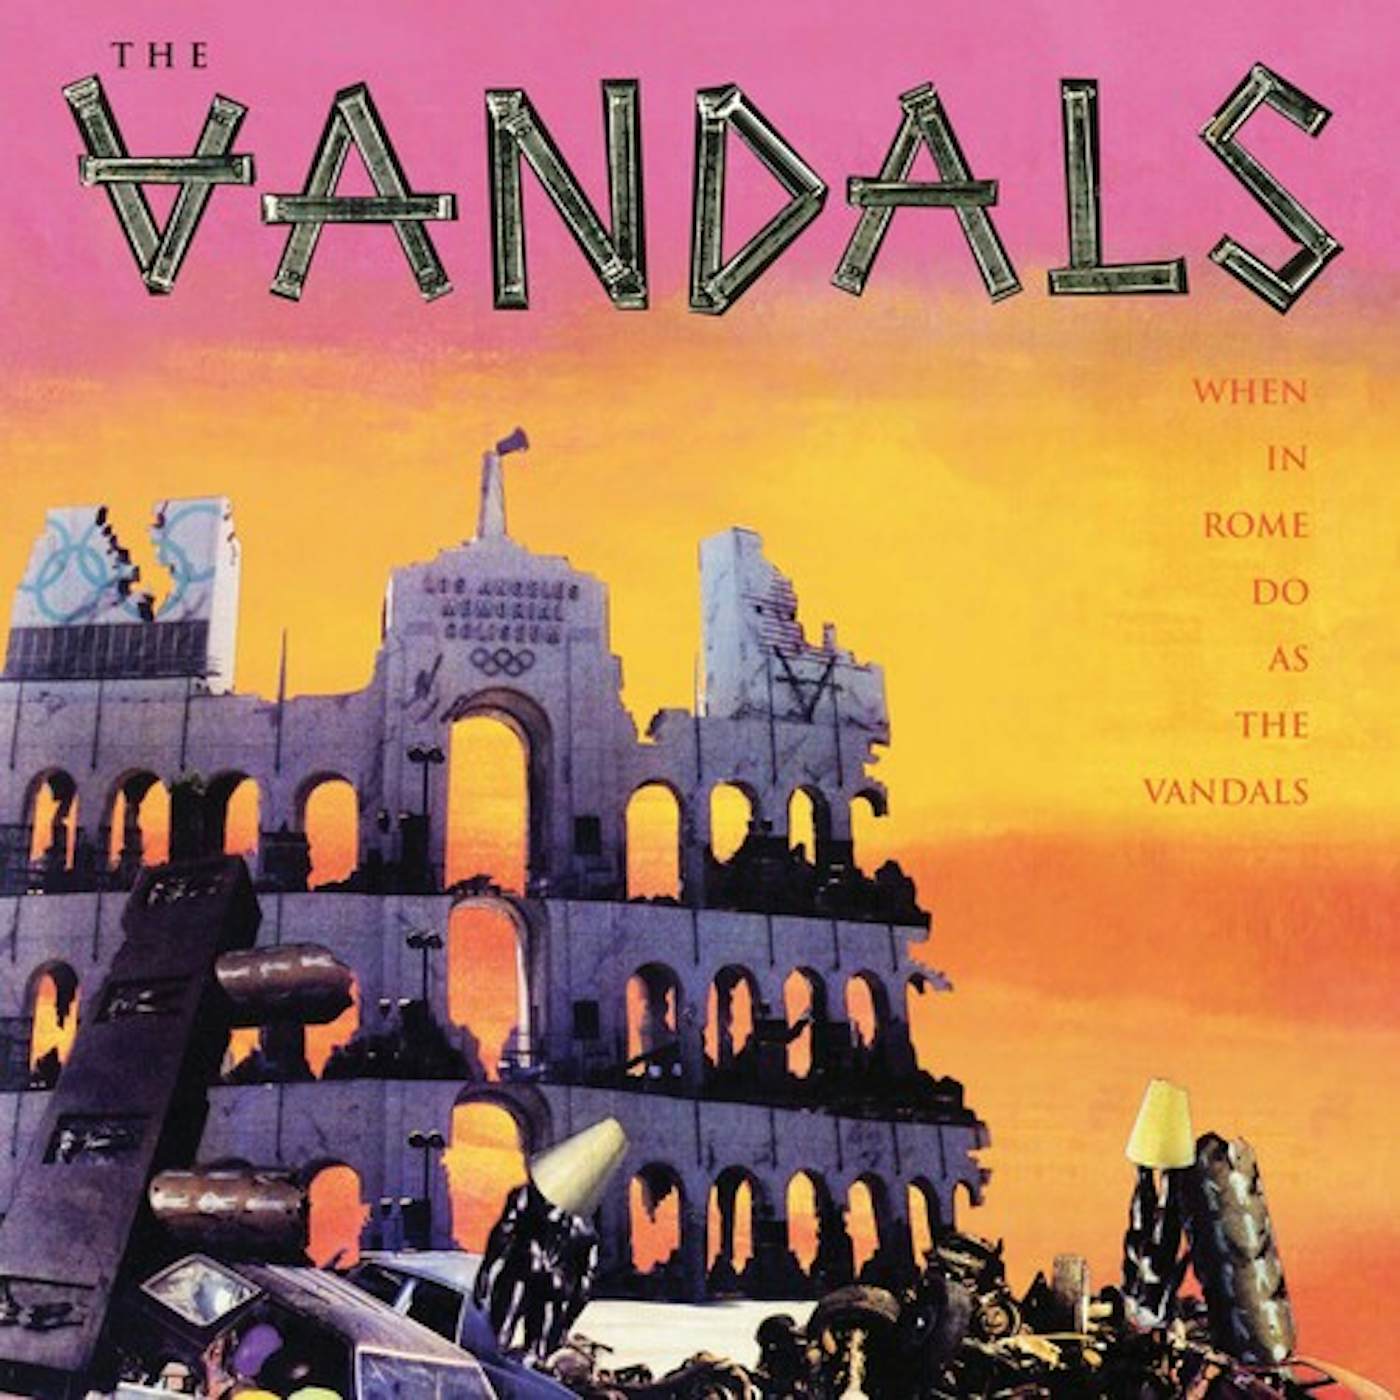 WHEN IN ROME DO AS THE VANDALS - PINK/BLACK Vinyl Record